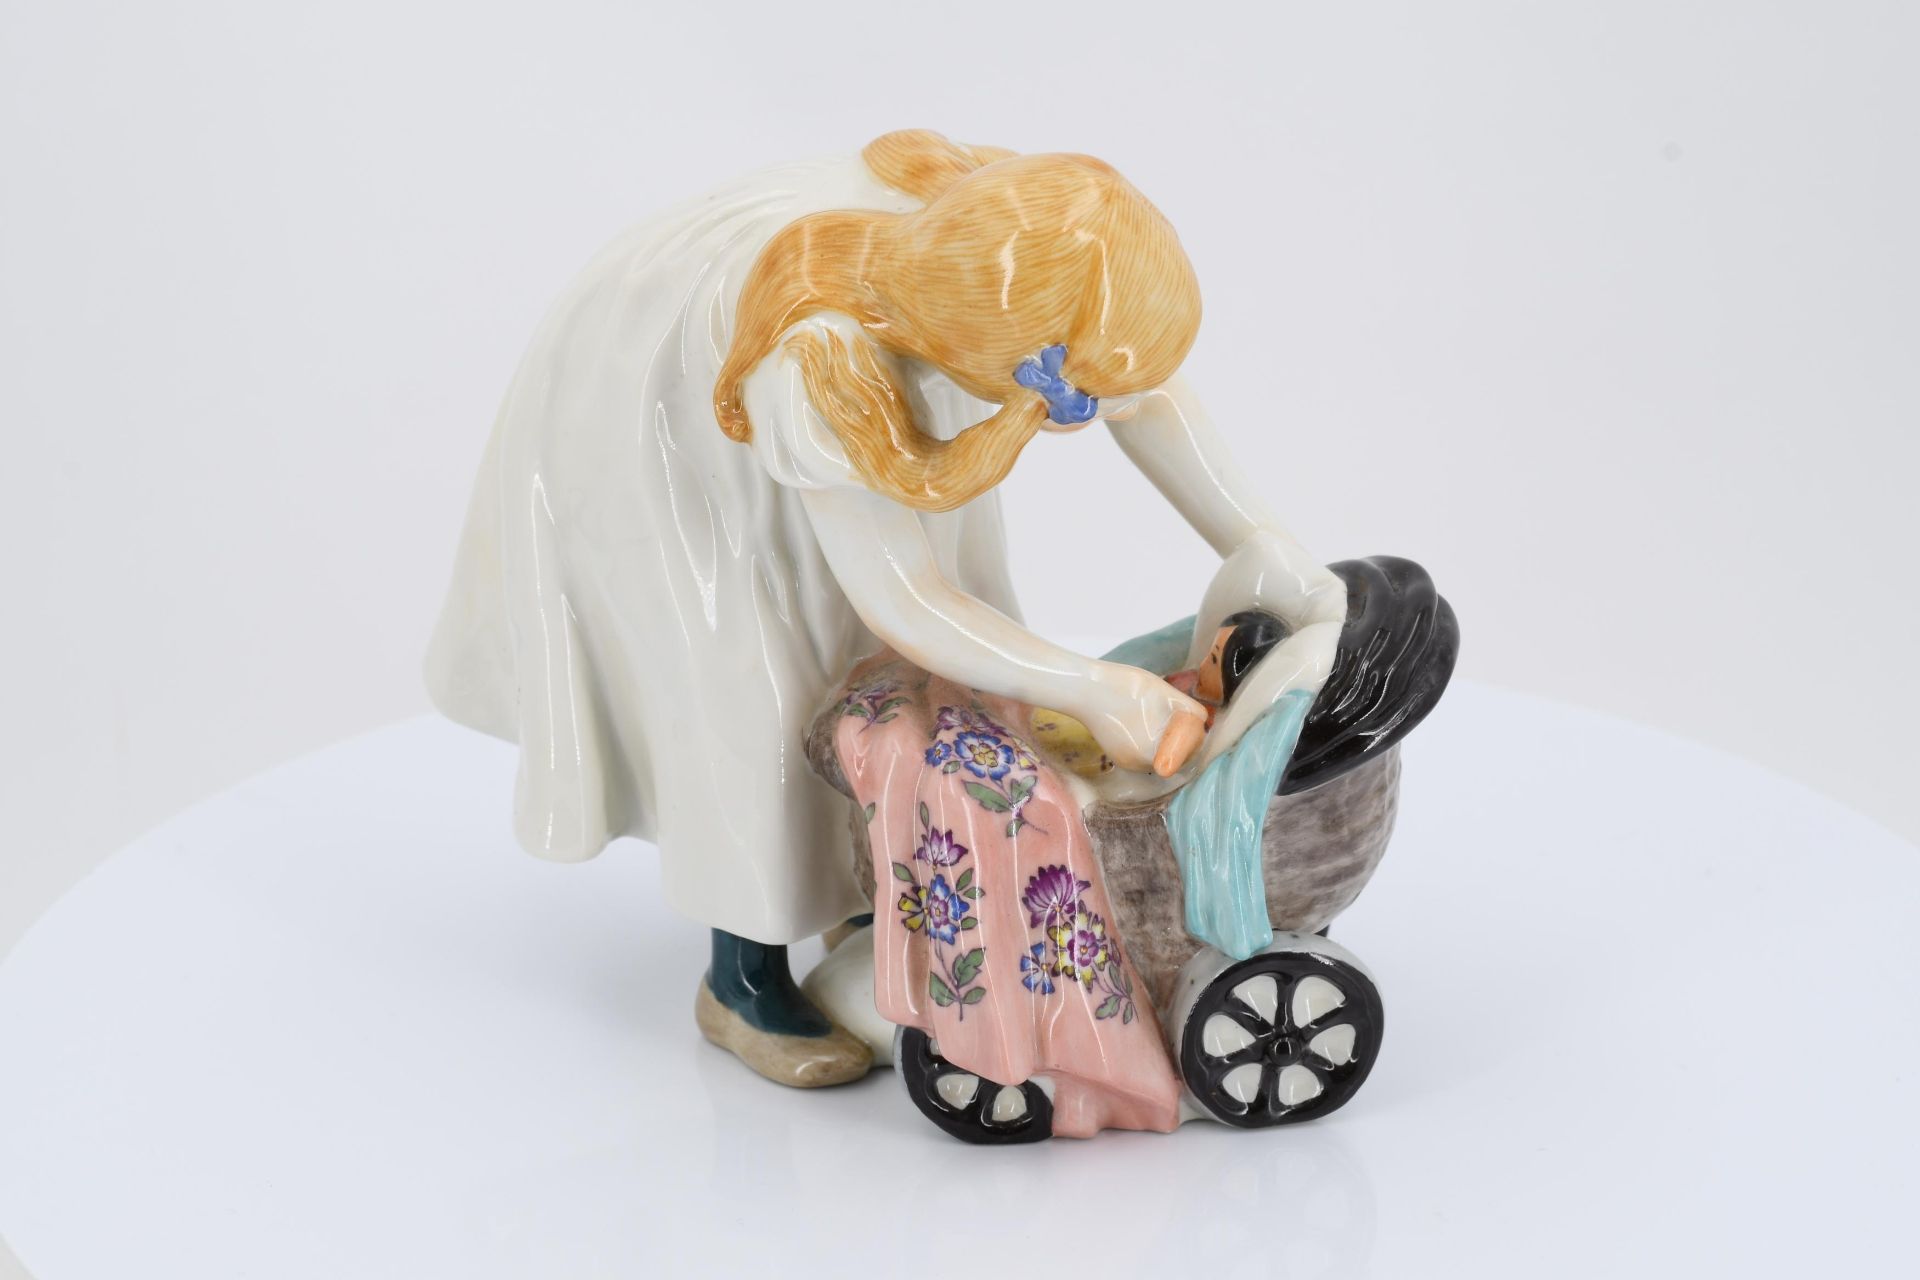 Porcelain figurine of girl with a doll's pram - Image 3 of 6